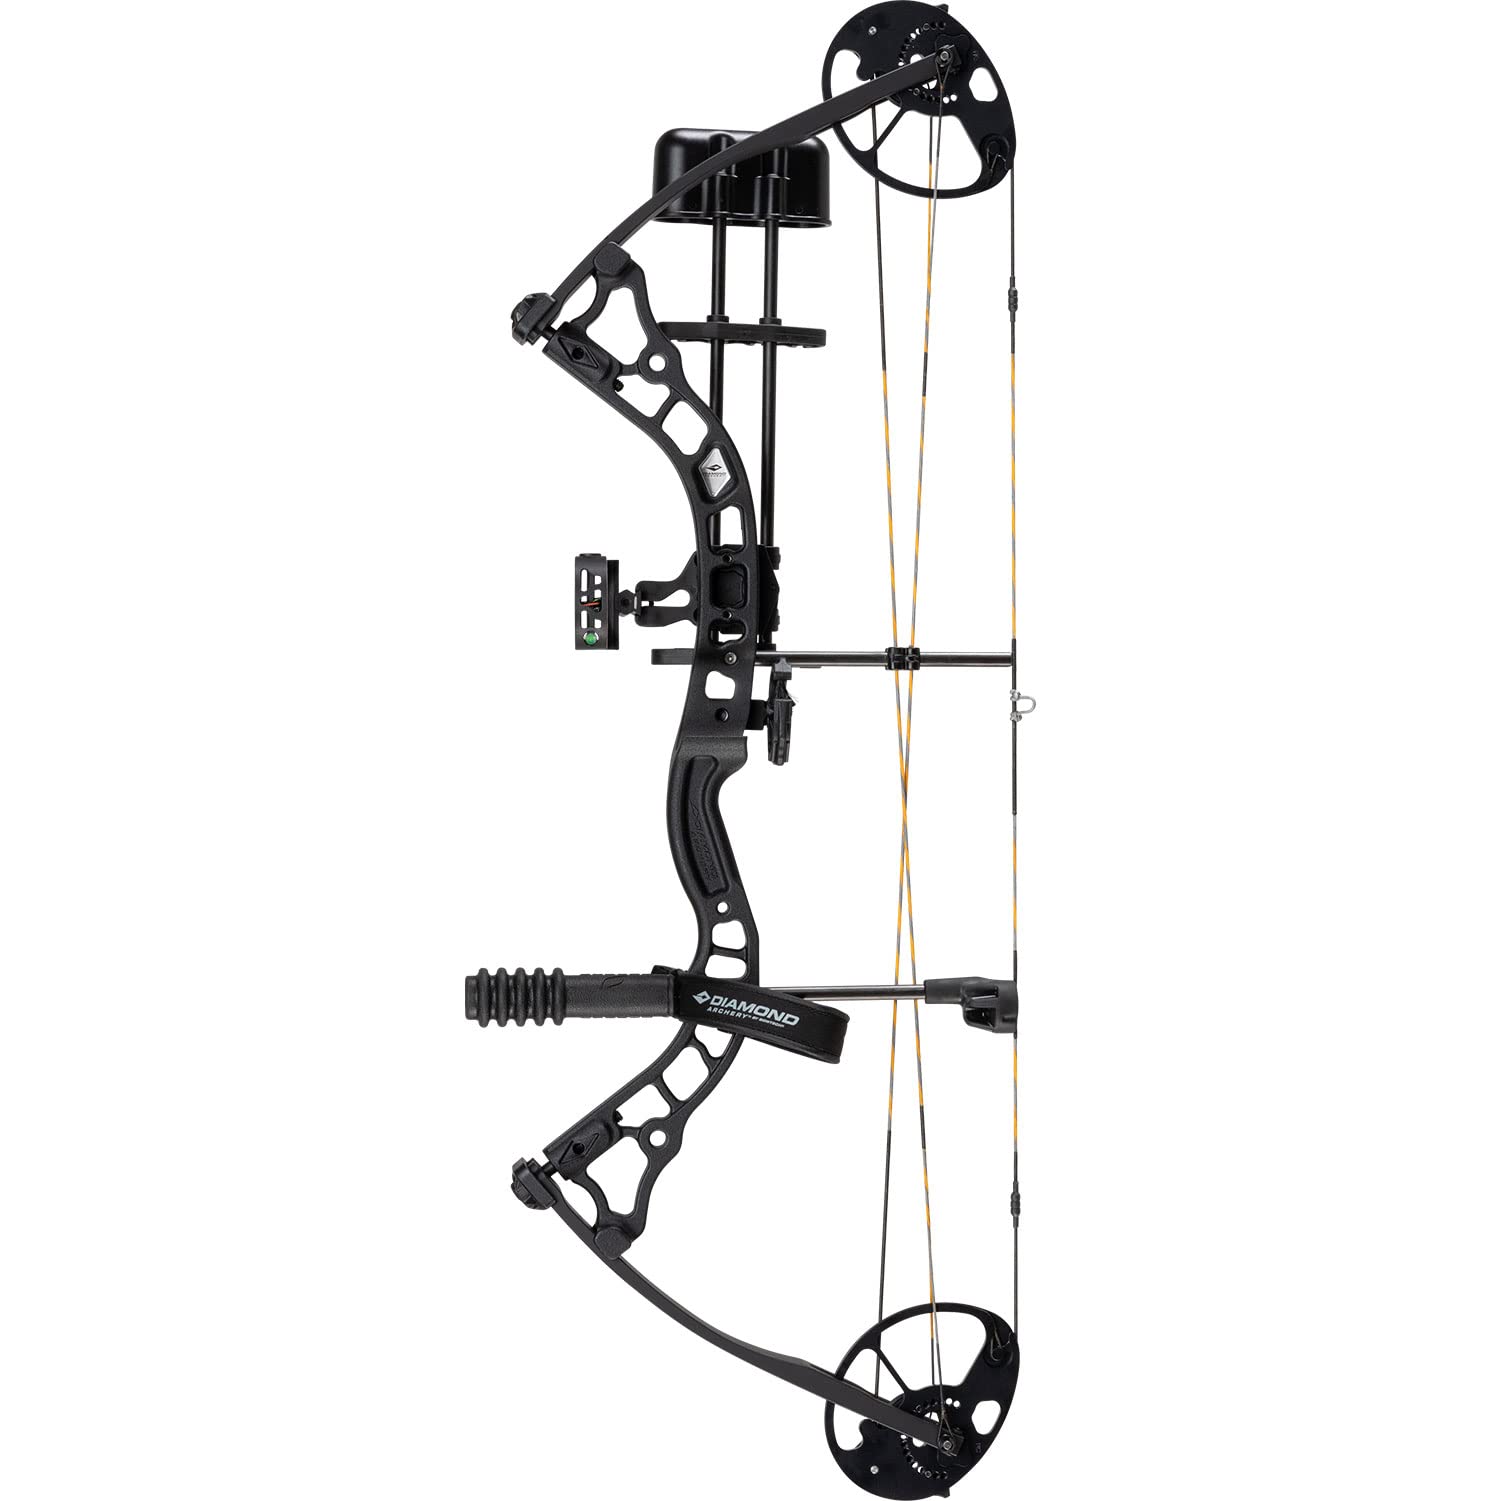 Diamond Archery Infinite 305 Adjustable Fully Accessorized Hunting compound Bow - 7-70 LBS Draw Weight, 19-31 Draw Length, 305 F